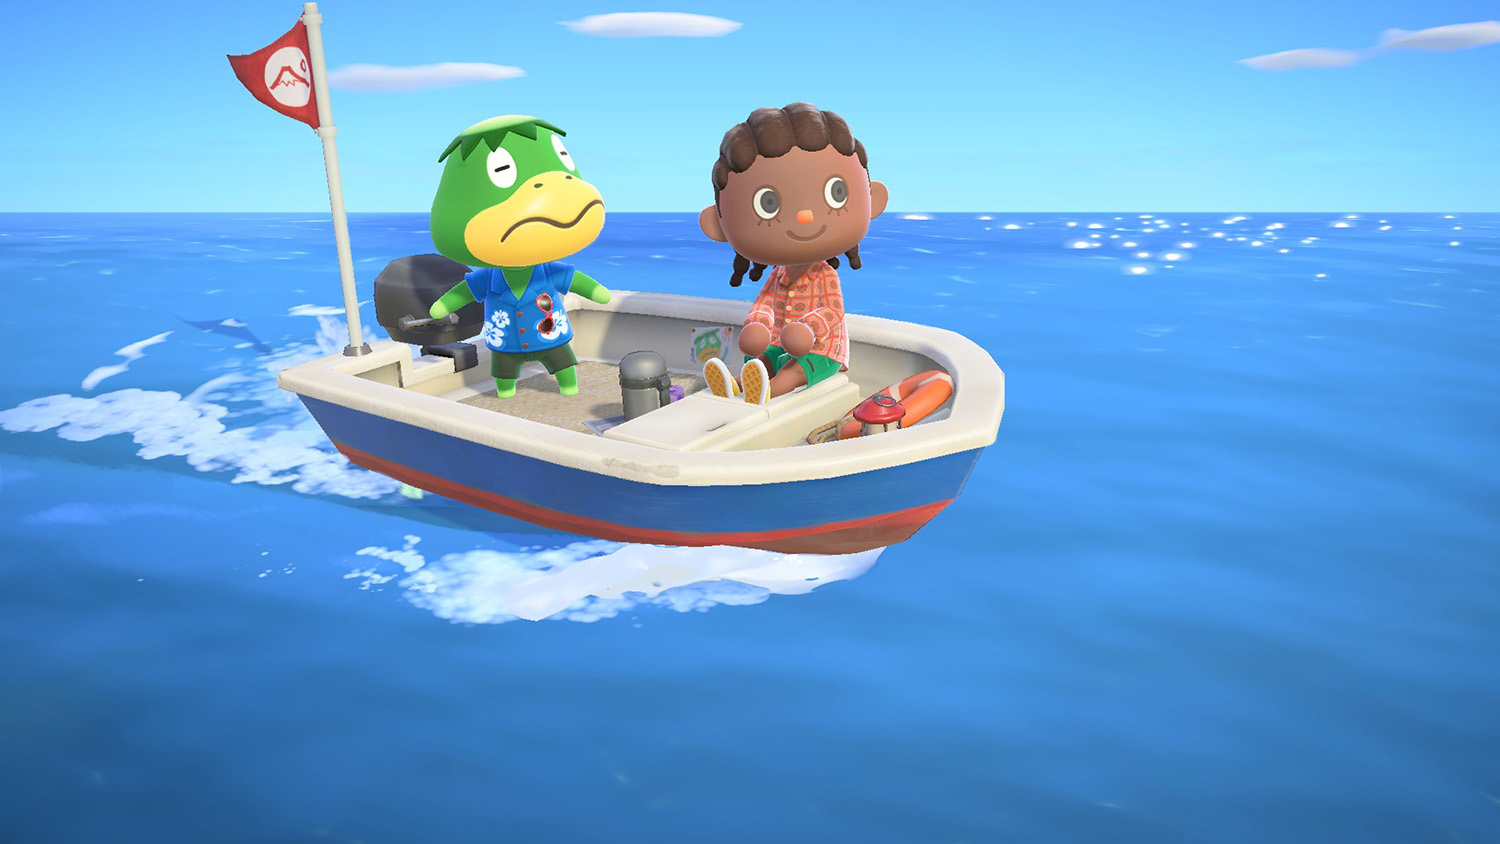 Animal Crossing: New Horizons player rides a boat with Kapp'n